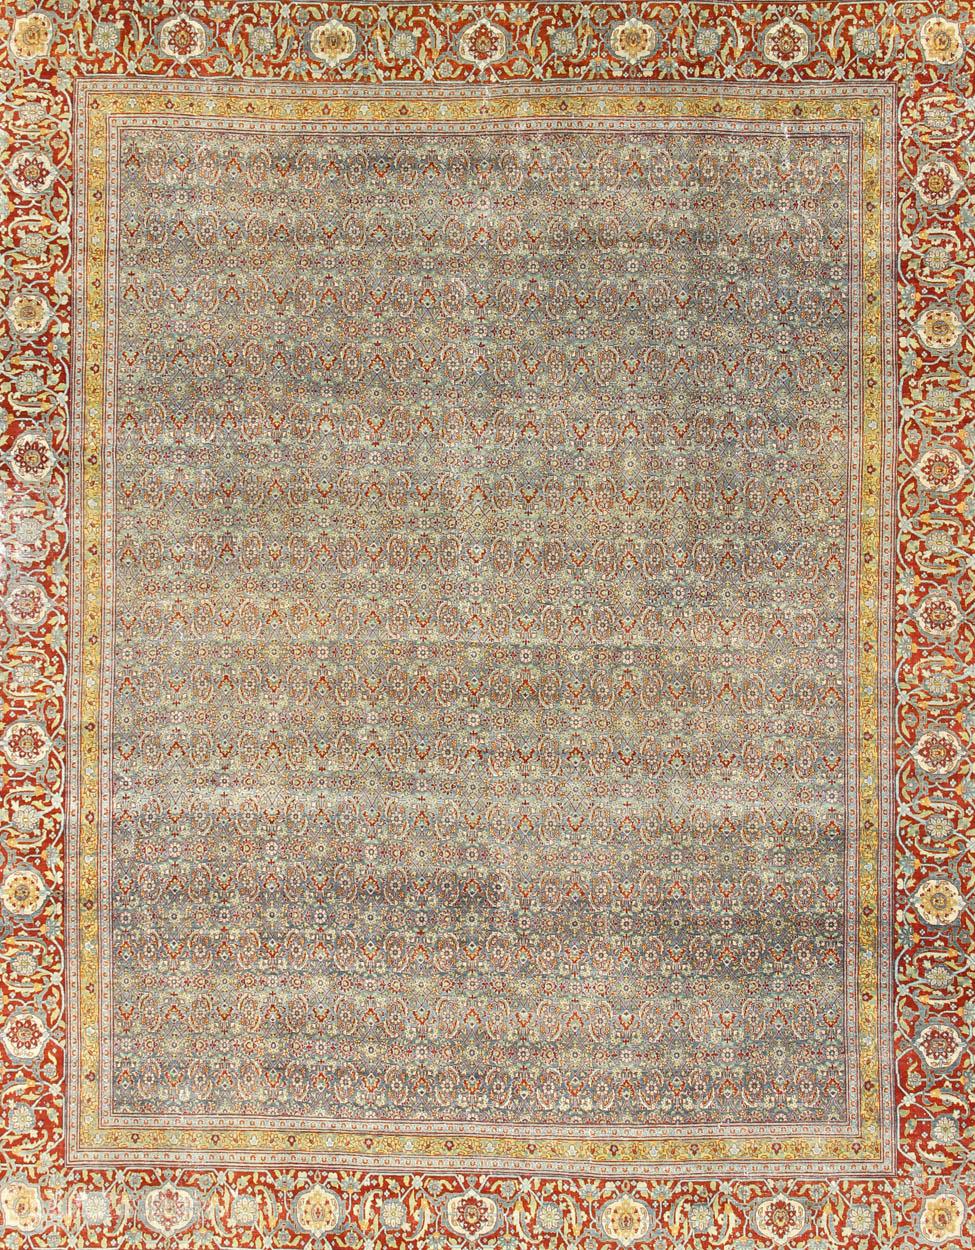 Hand-Knotted Large All-Over Geometric Antique Persian Tabriz Rug in Blue, Gray, and Red Tones For Sale